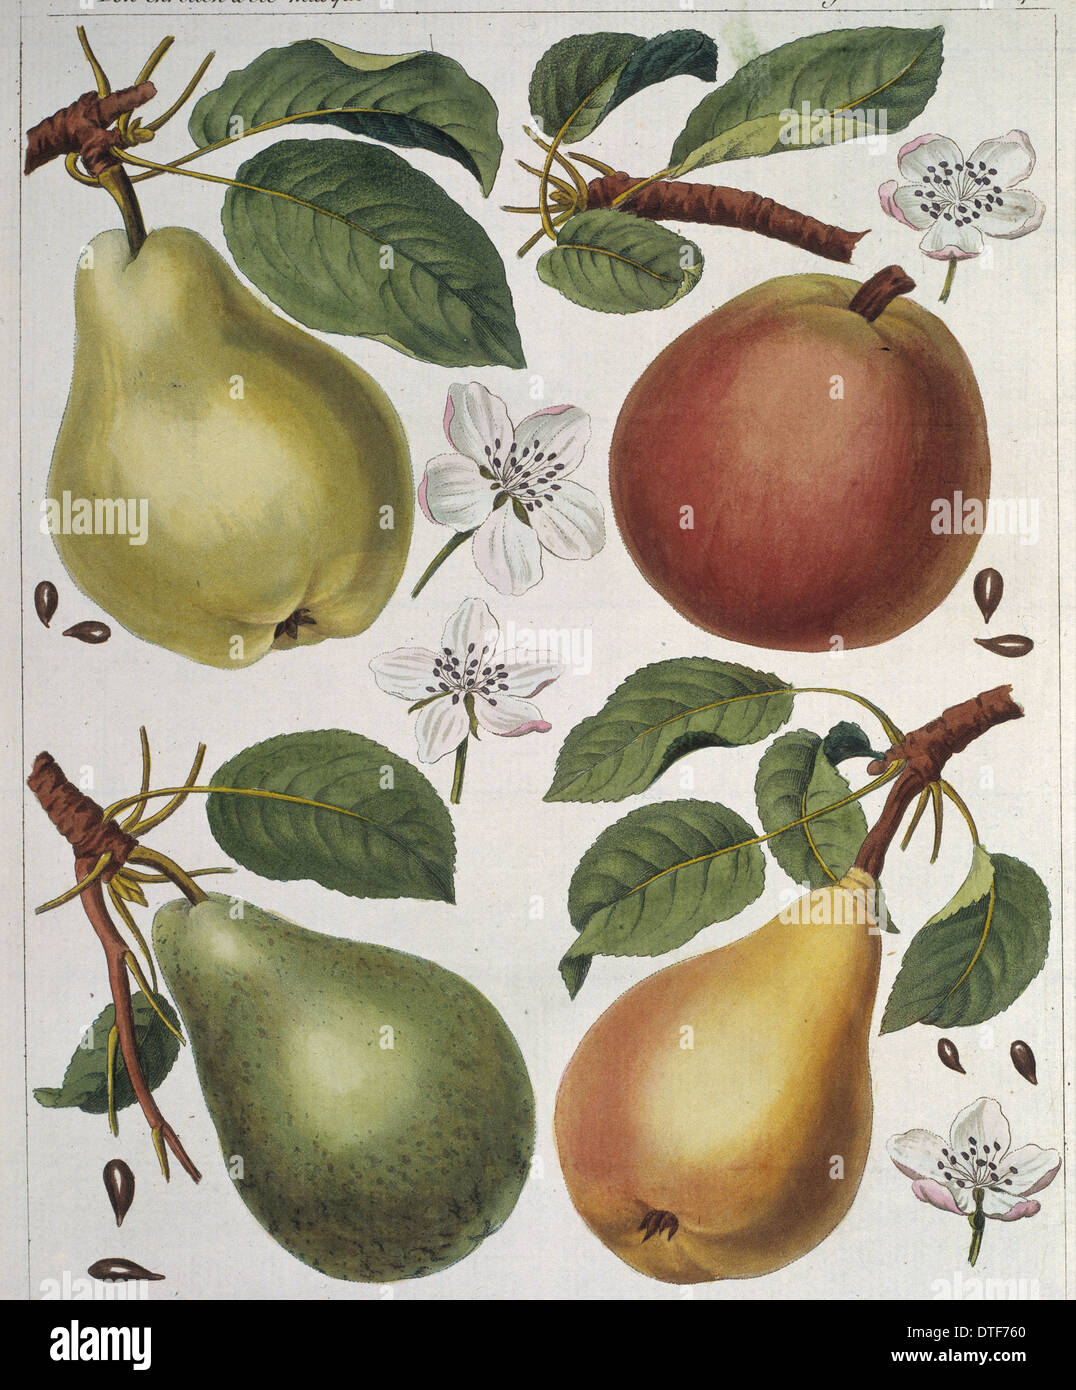 Pyrus sp., pear Stock Photo